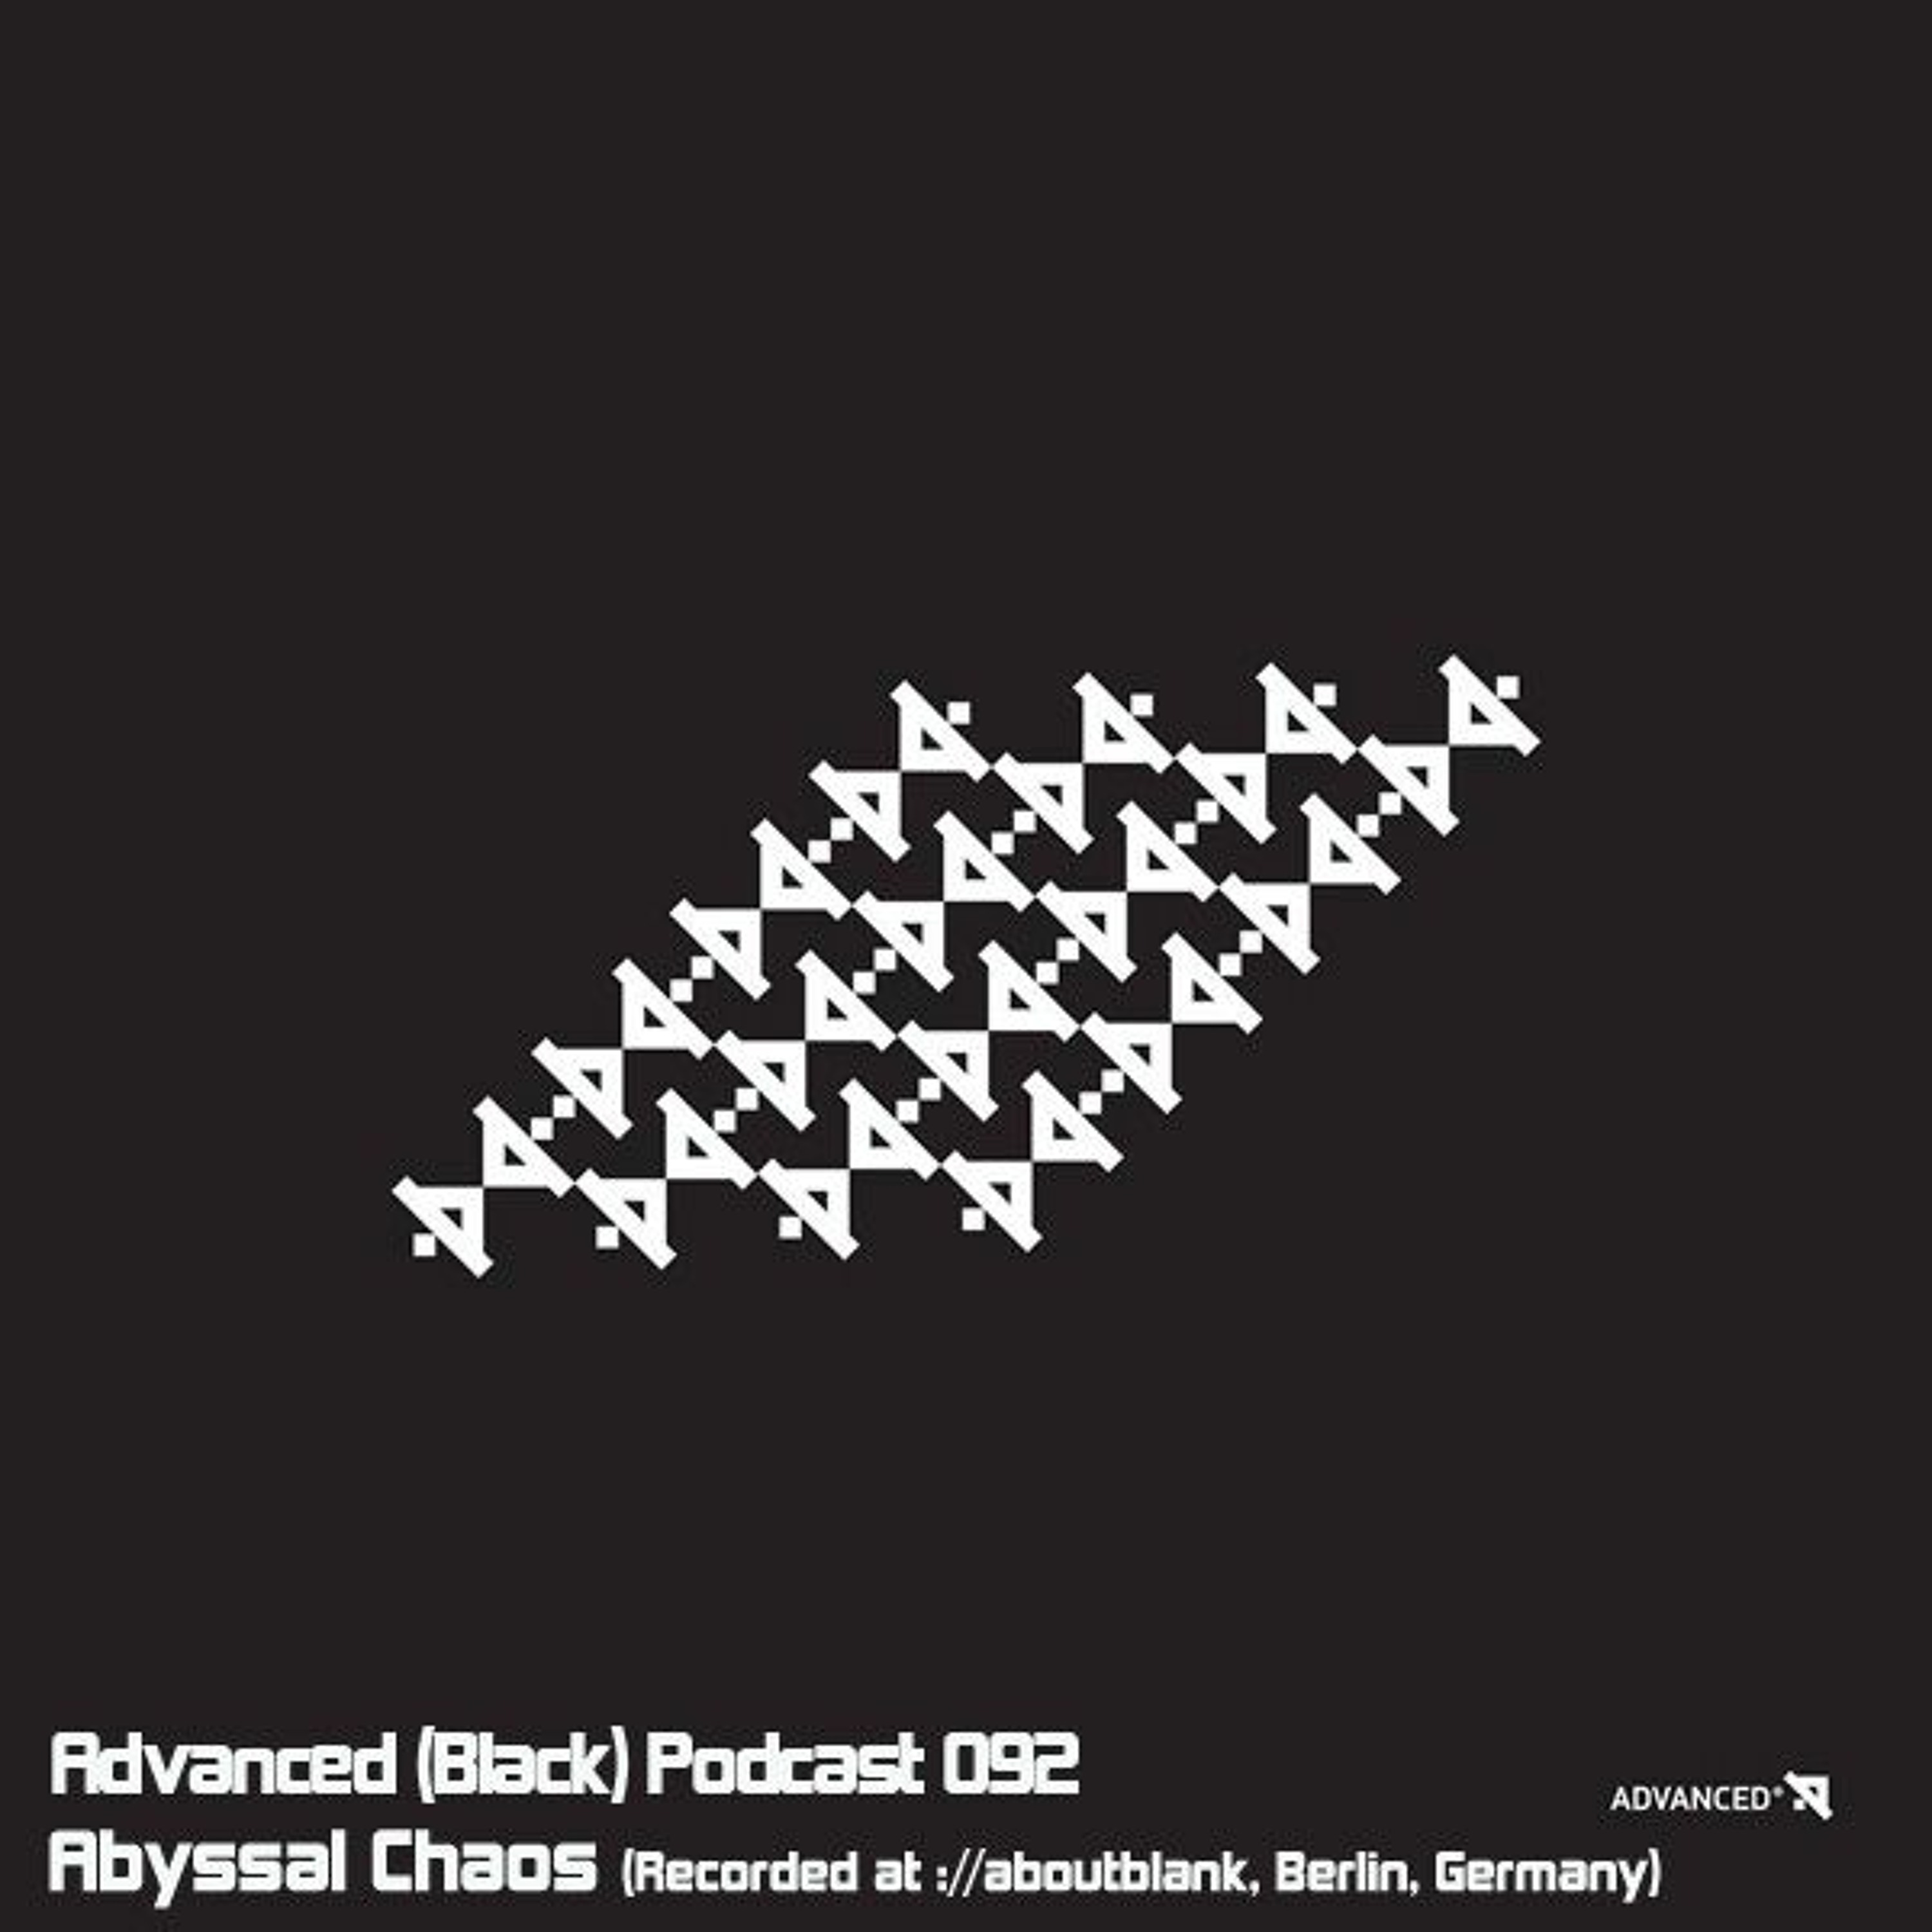 Advanced (Black) Podcast 092 with Abyssal Chaos (Recorded at ://aboutblank, Berlin, Germany)